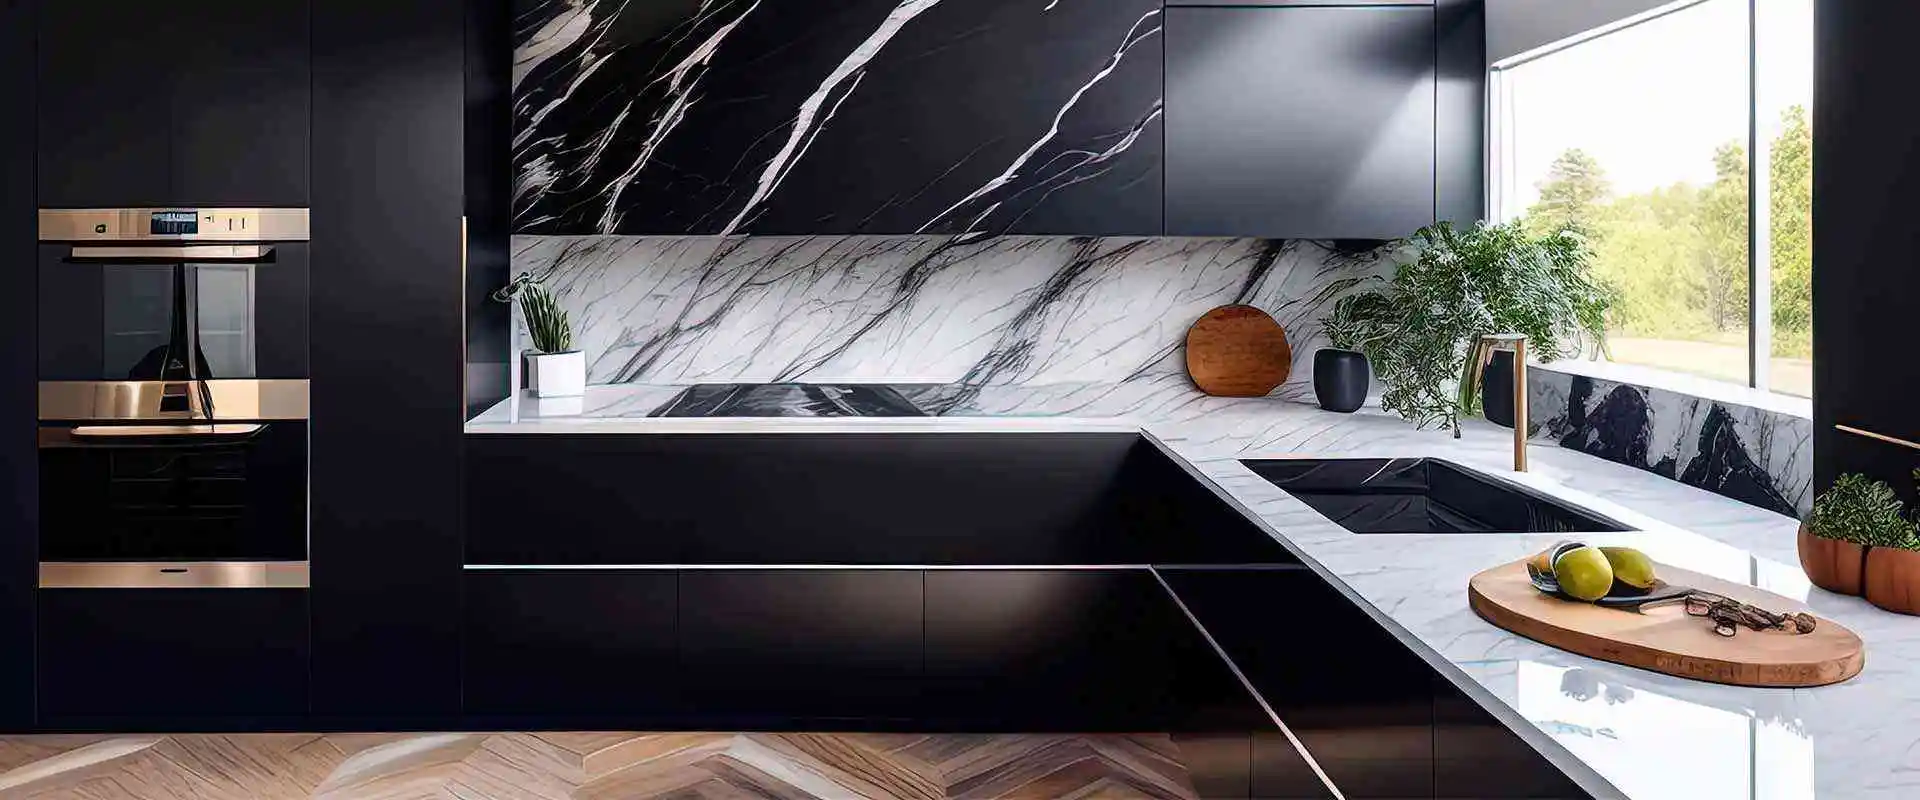 Marble Slabs and Countertops Designs for Kitchen Area